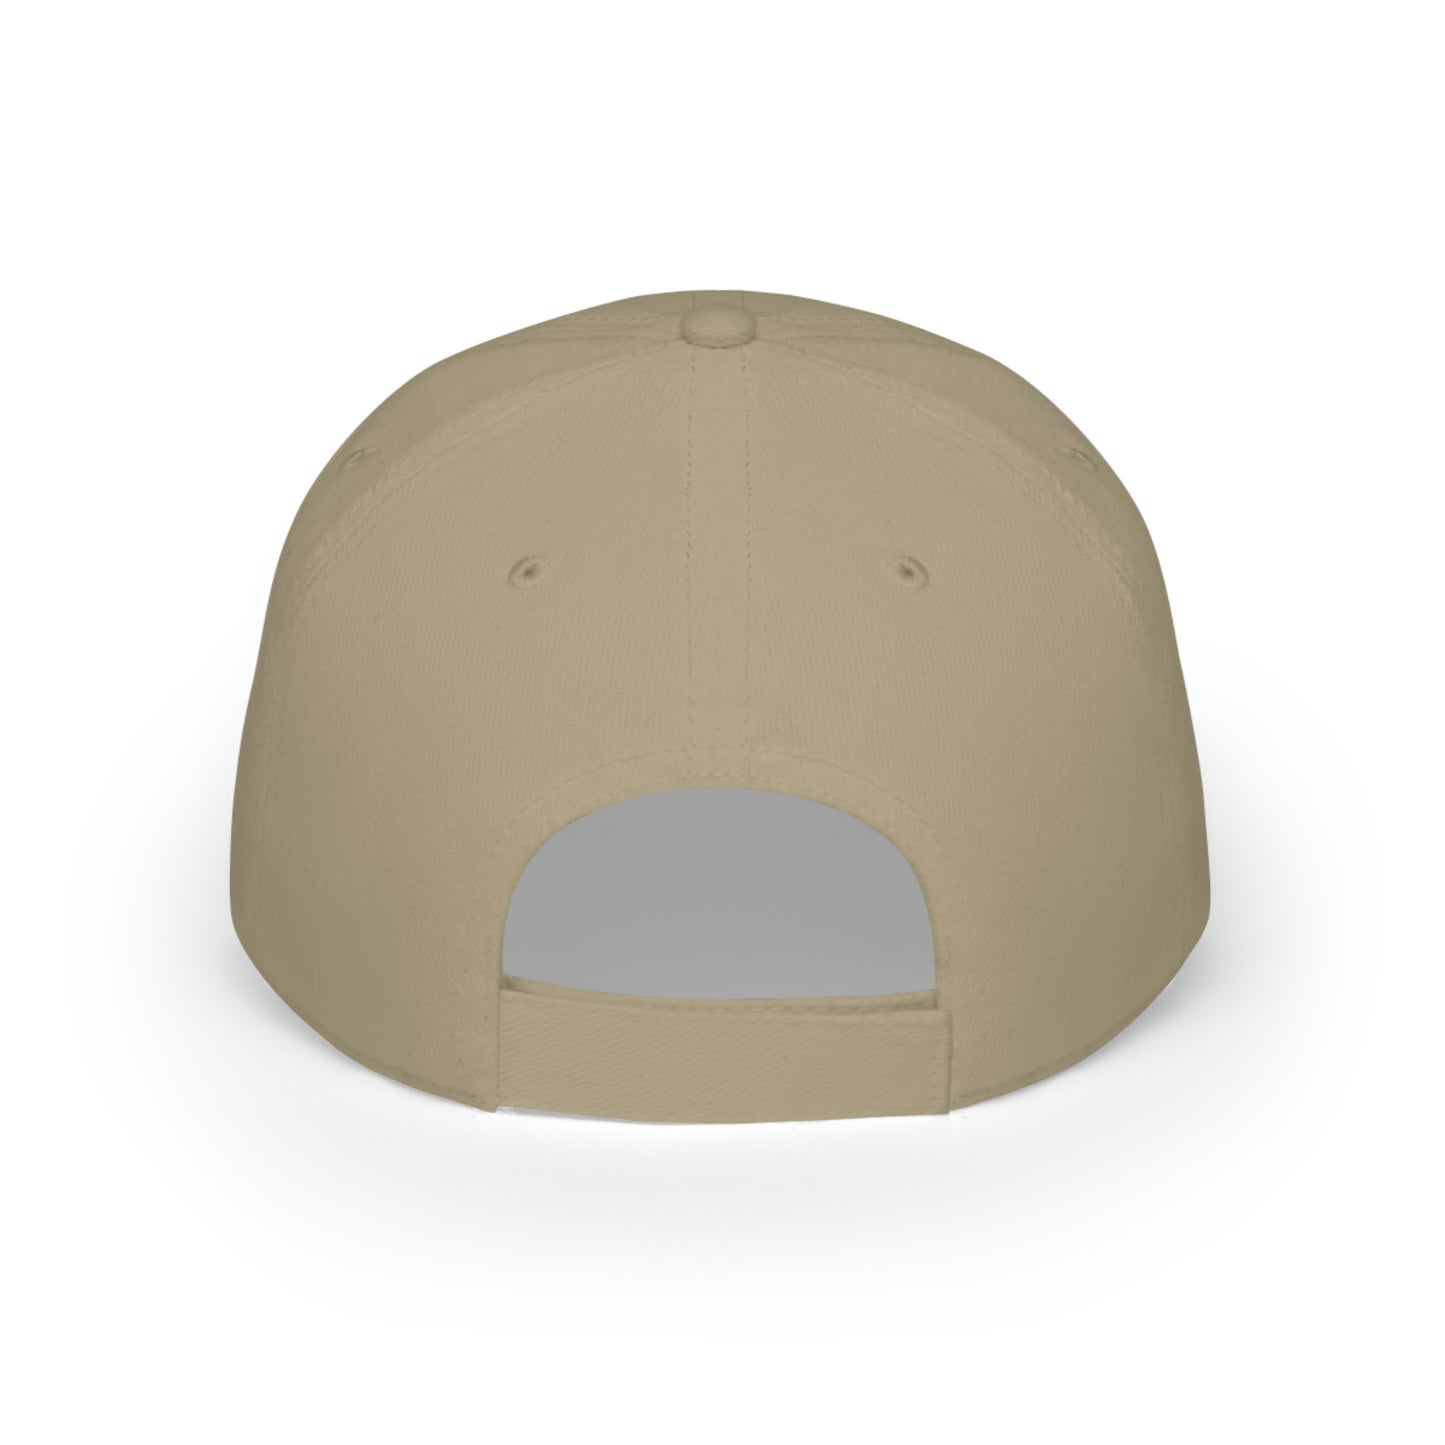 Thrashed Off-Road Abstract Tundra Hat - Mid-Atlantic Off-Roading